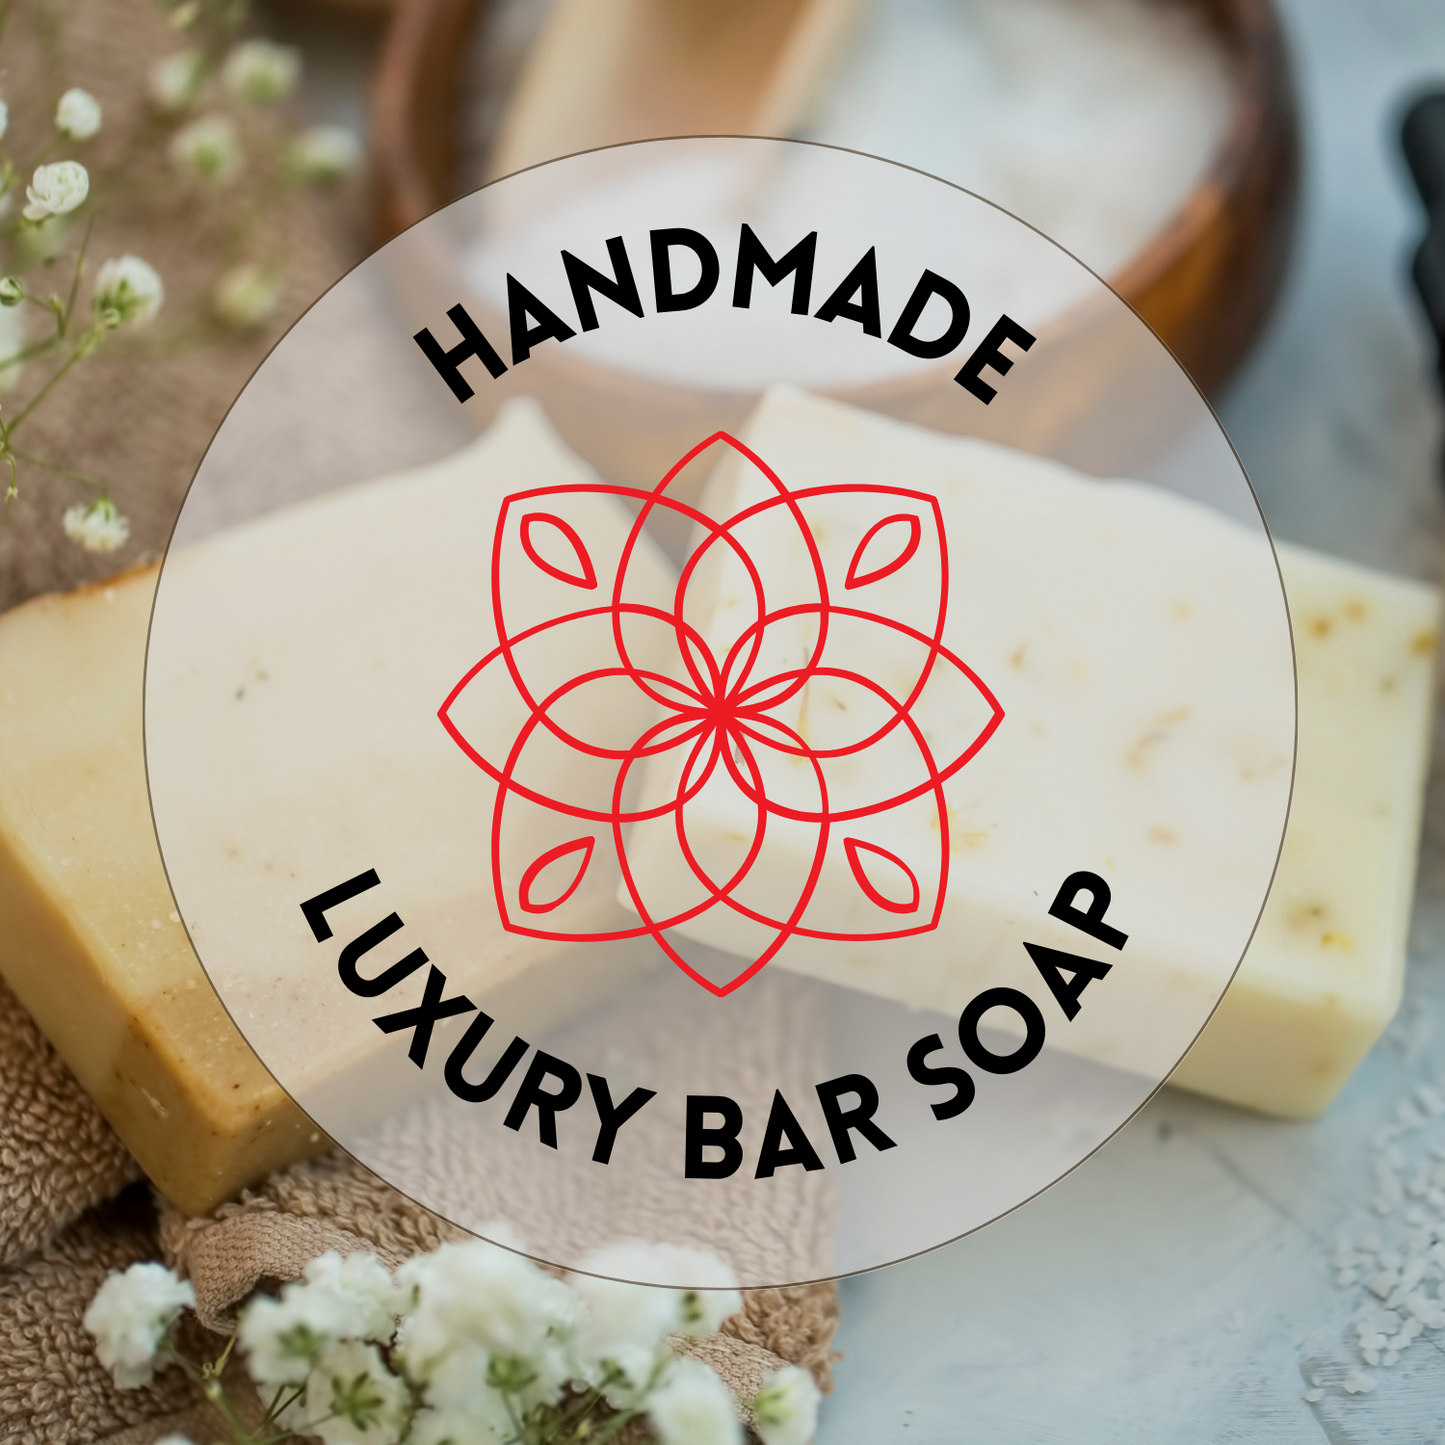 Majestic Lather Simply Pure Luxury Handmade Bar Soap